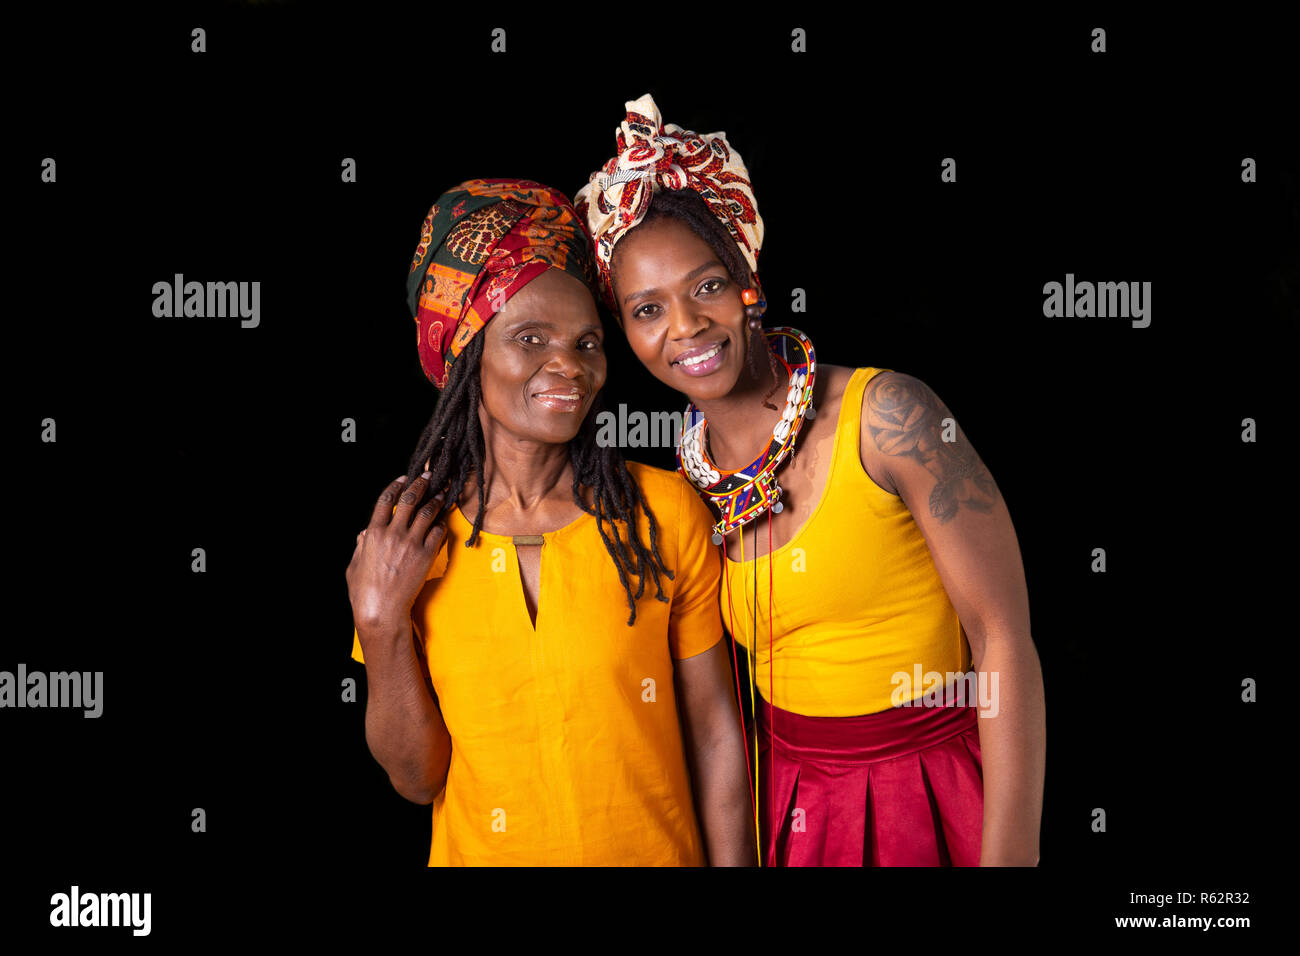 Two African women in headscarves against a black background Stock Photo